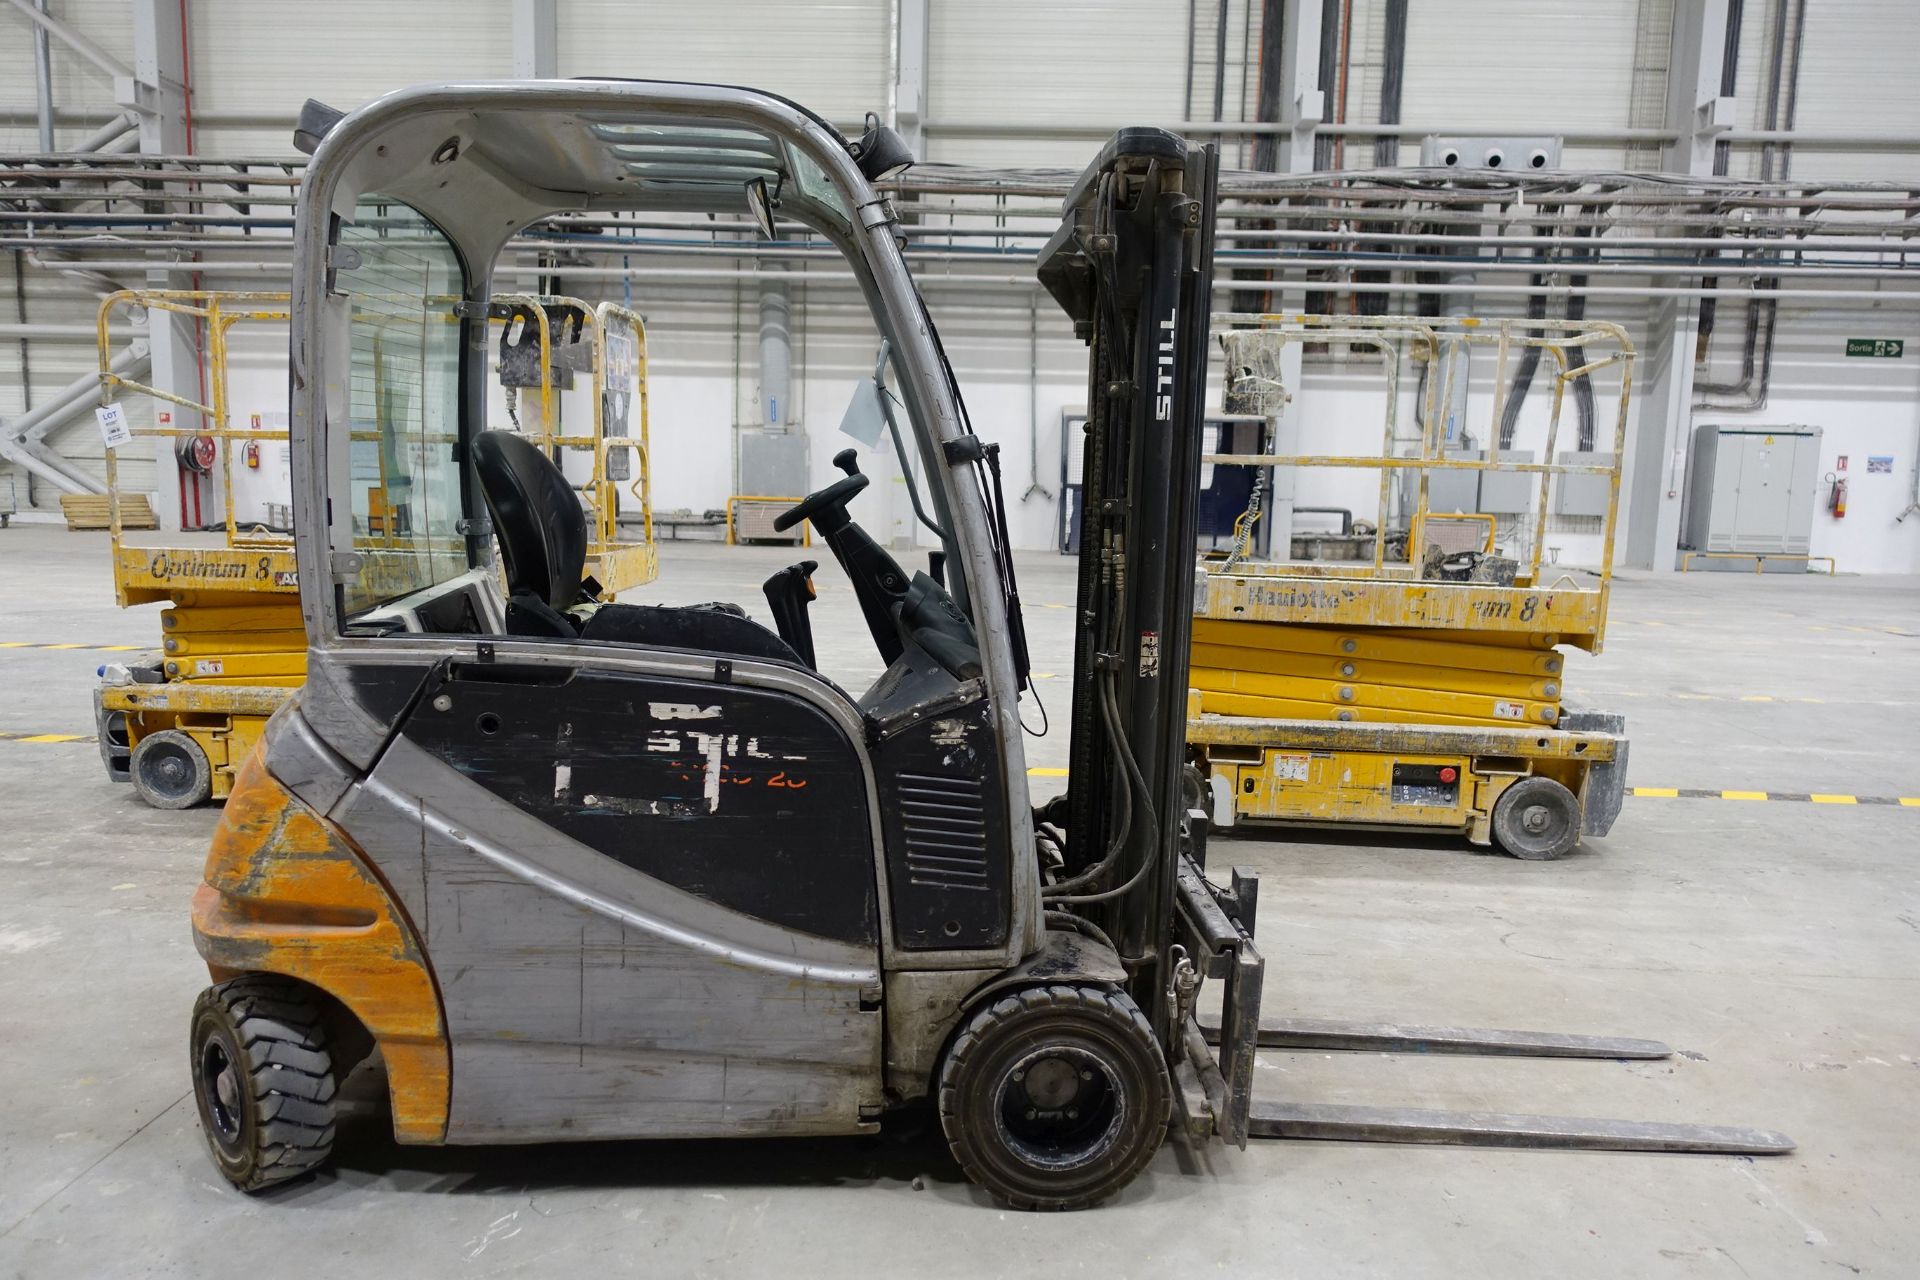 STILL RX20-20P Electric Forklift Truck, 2,000kg Capacity with Sideshift, Ser # 516216H00380 (2017) - Image 3 of 44